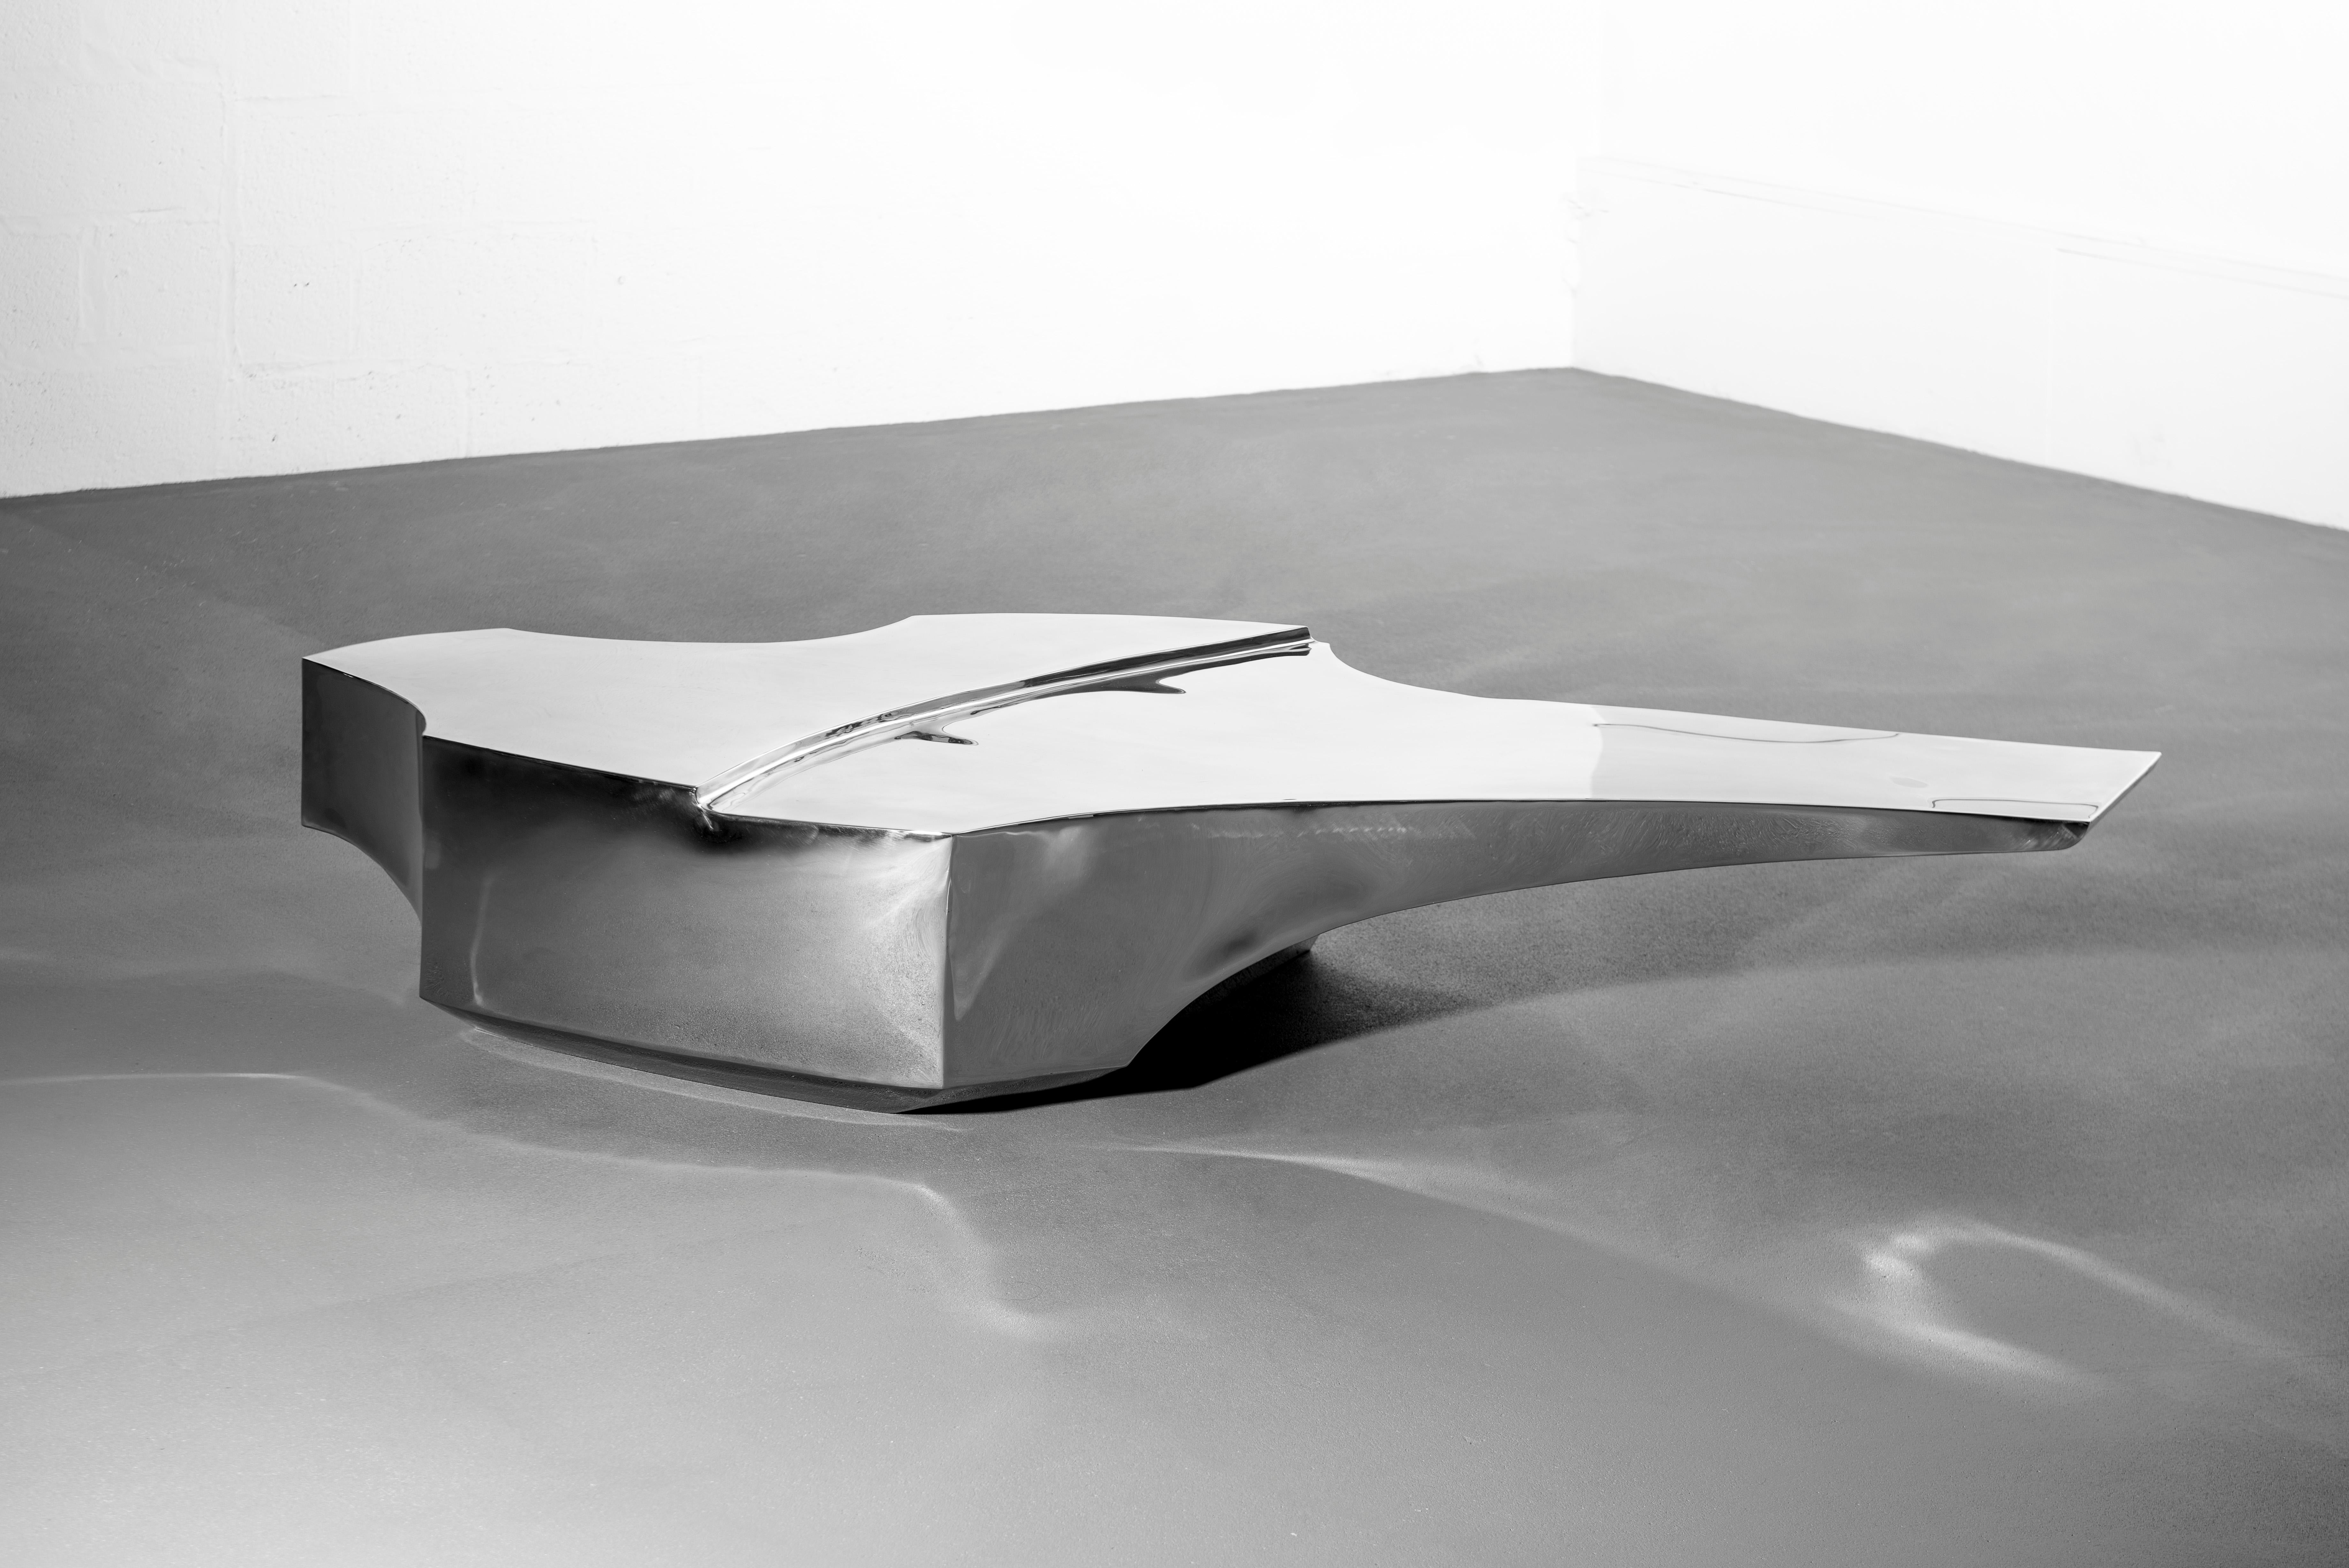 Belgian Stainless Steel Table Improvisation on the Theme of Formula One For Sale